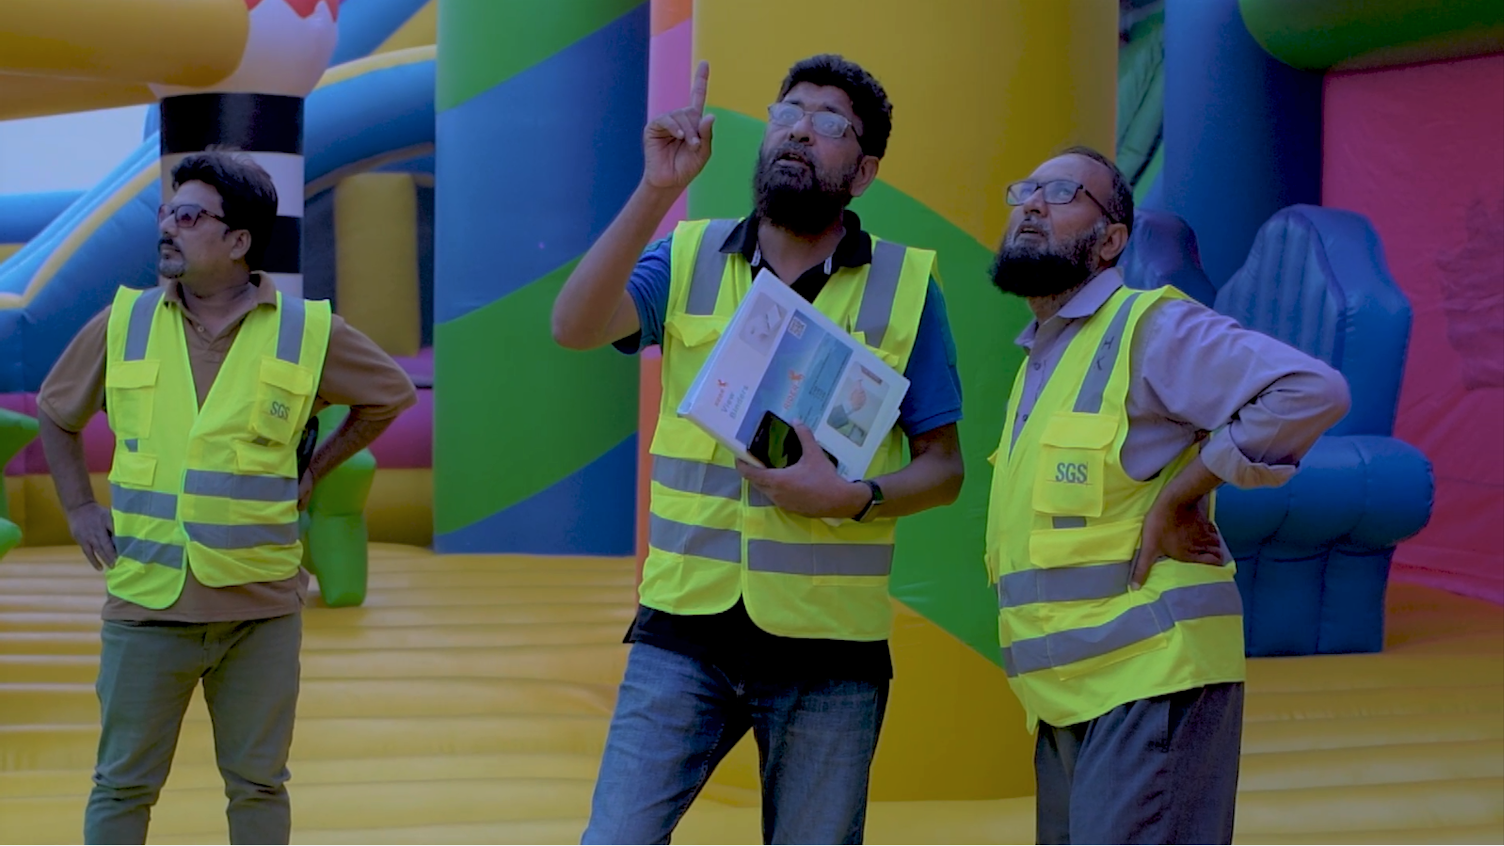 SGS Pakistan Facilitates Guinness World Record Achievement for the Largest Inflatable Bouncy Castle